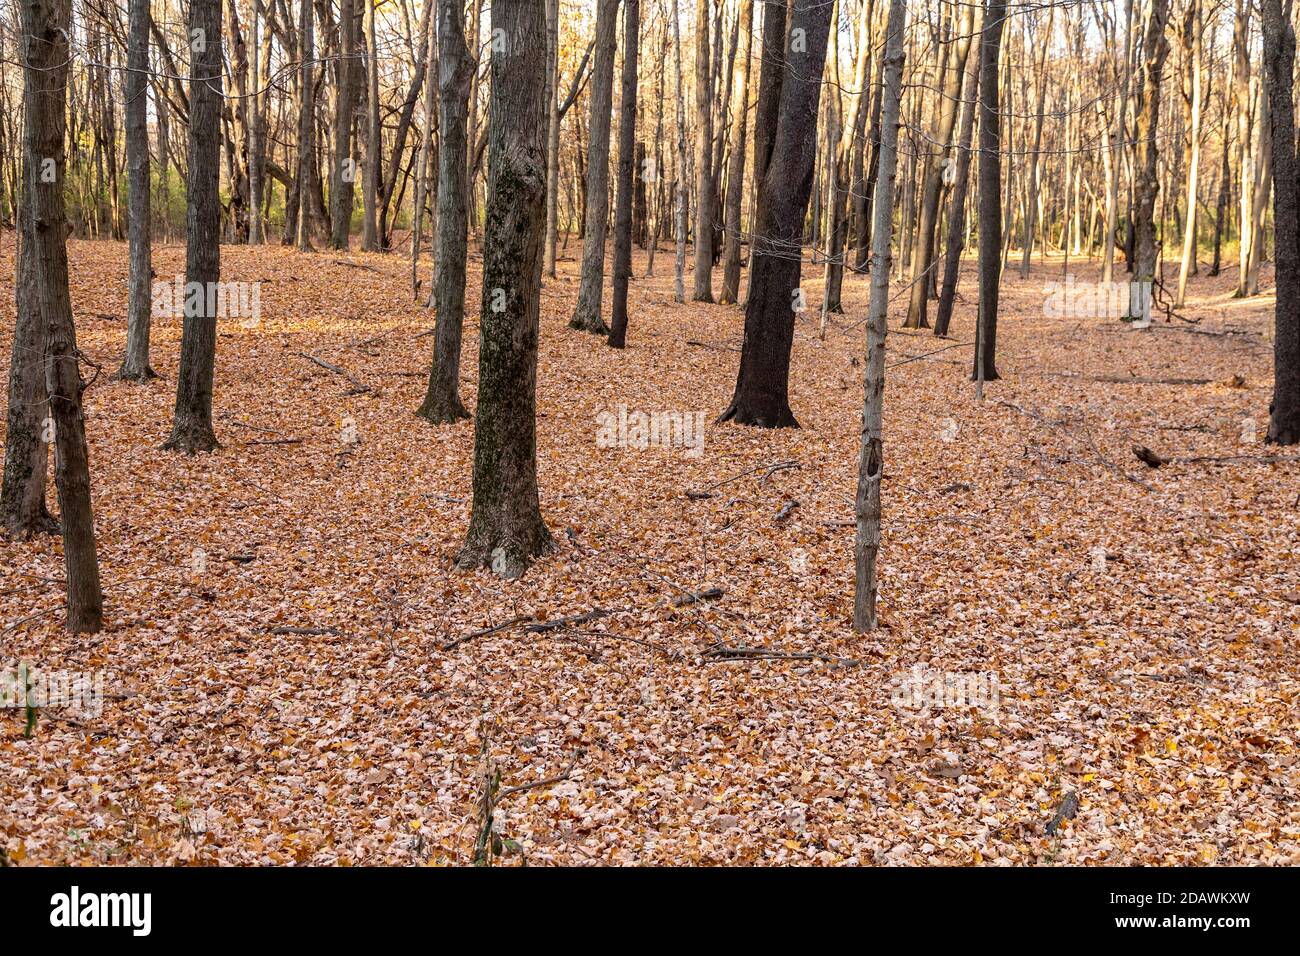 Prairieville, Michigan - Autumn leaves cover the ground in a west Michigan forest. Stock Photo